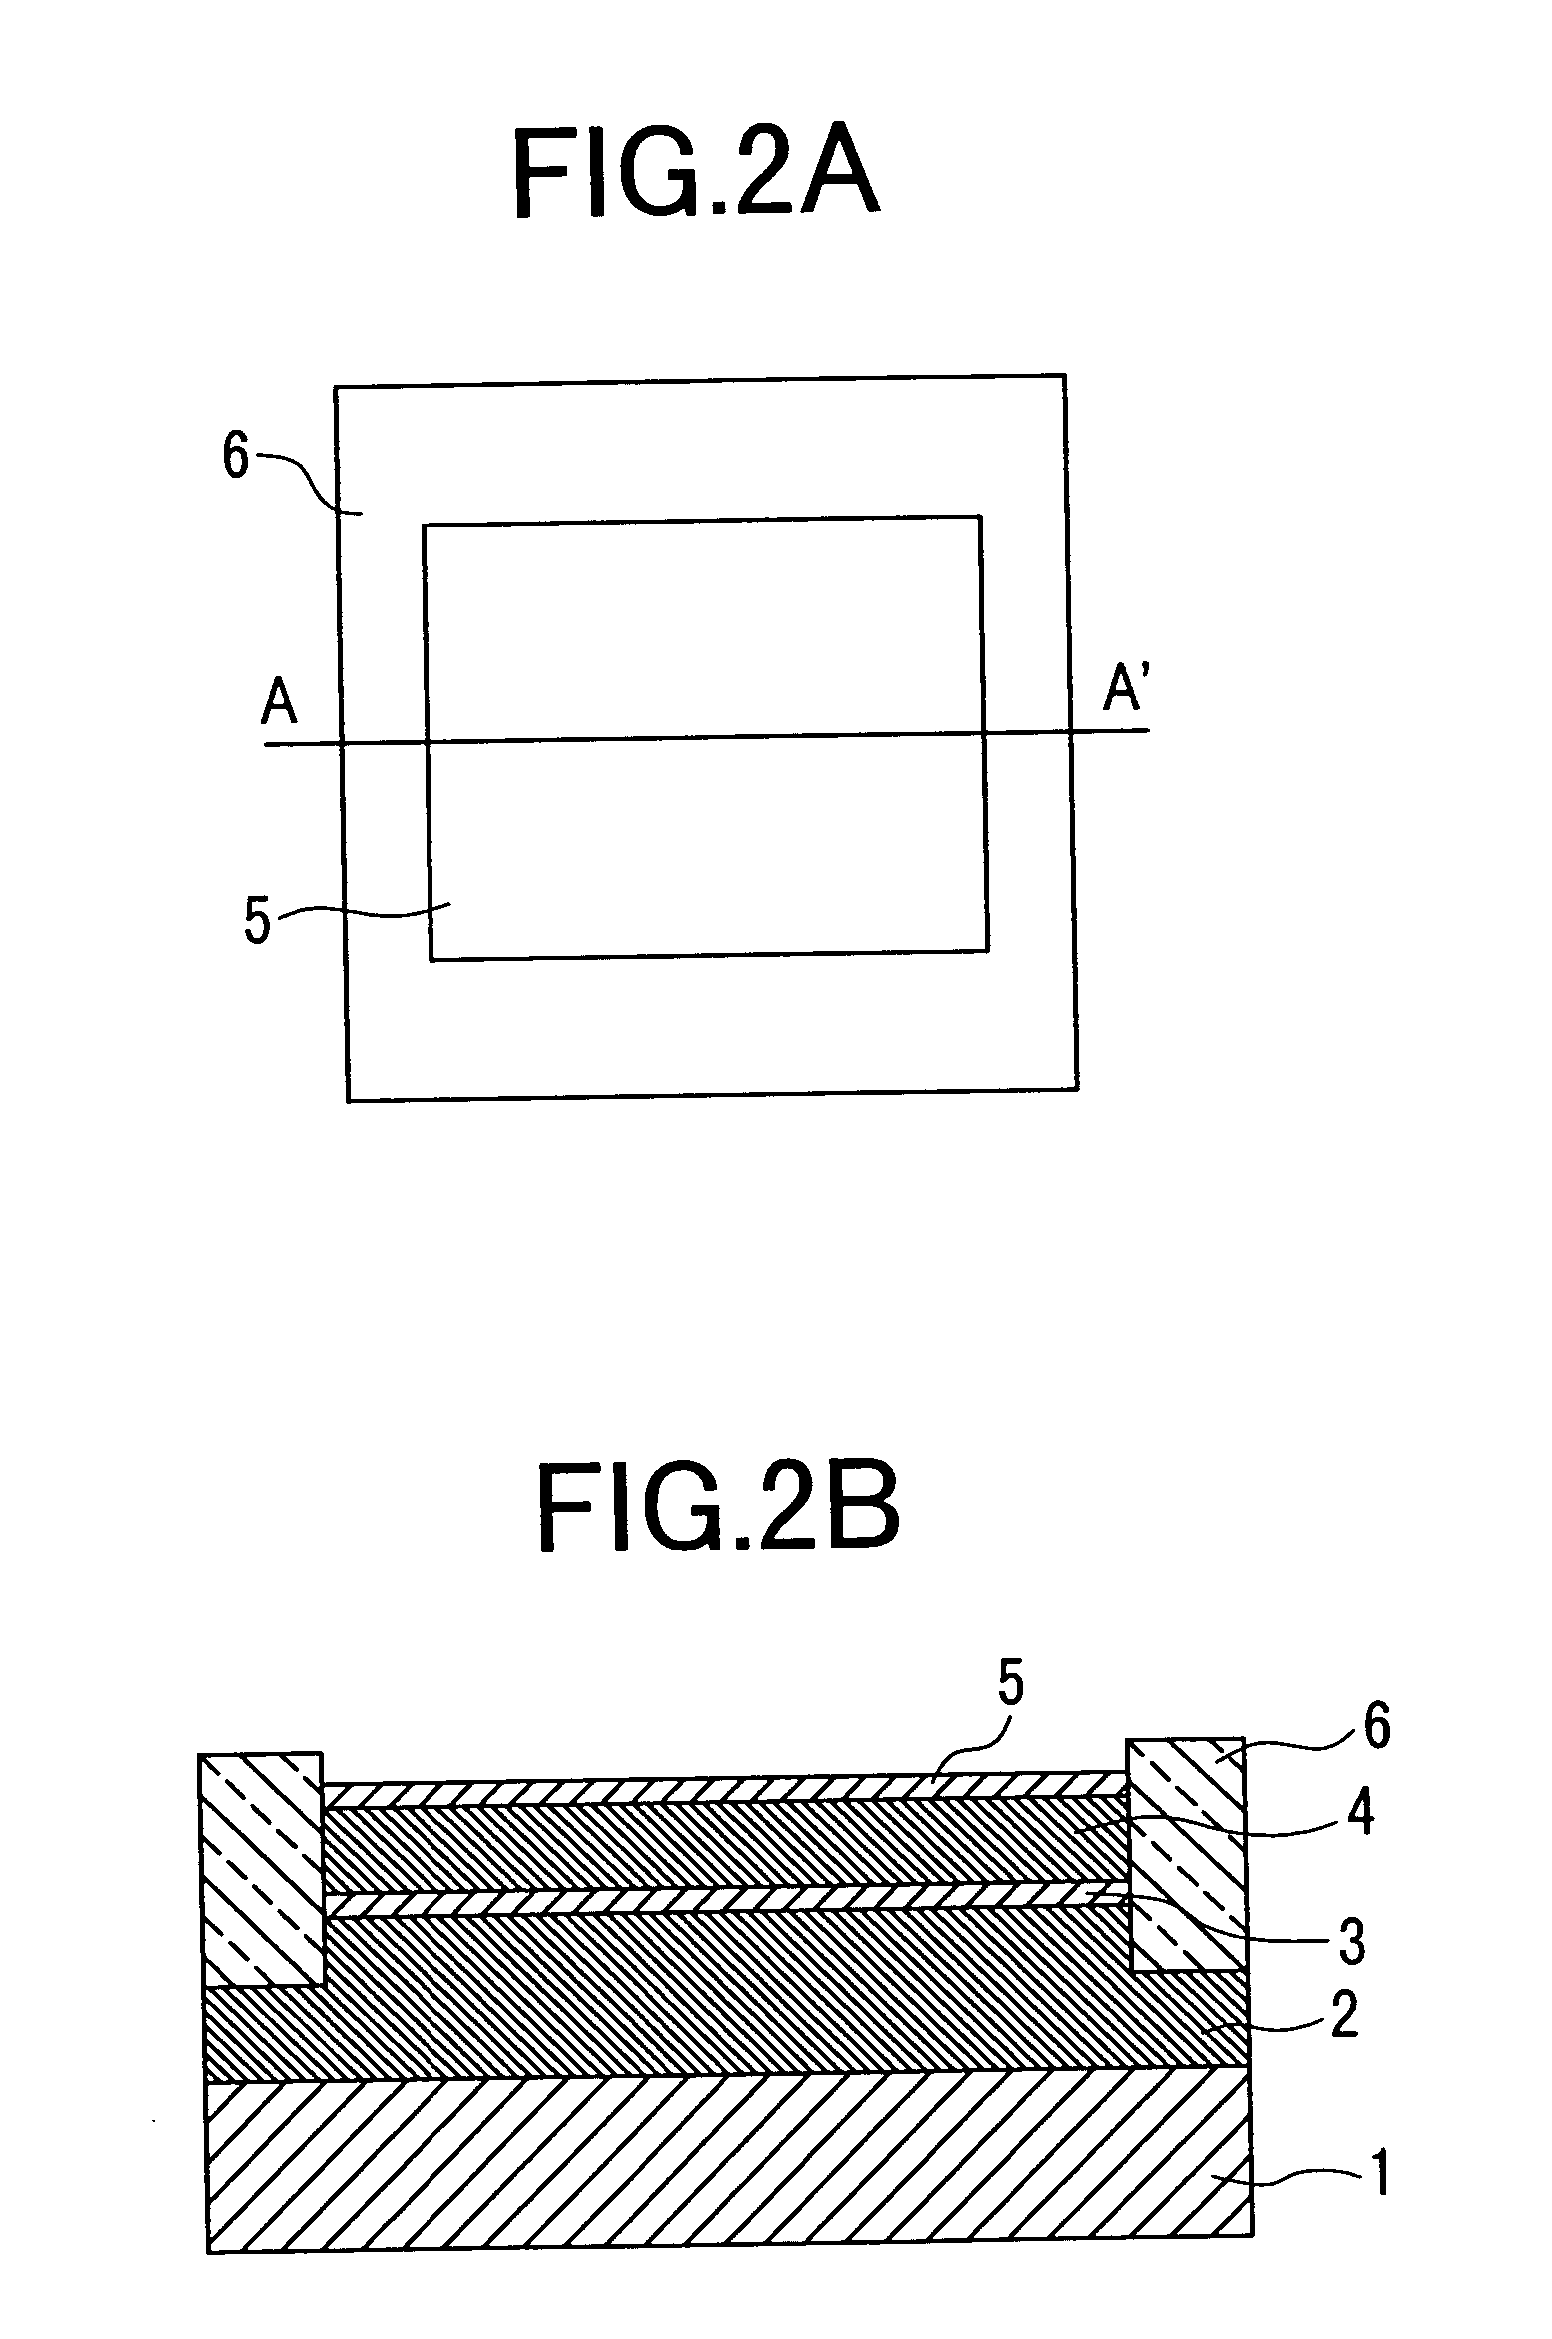 Insulated-gate field-effect transistor, method of fabricating same, and semiconductor device employing same